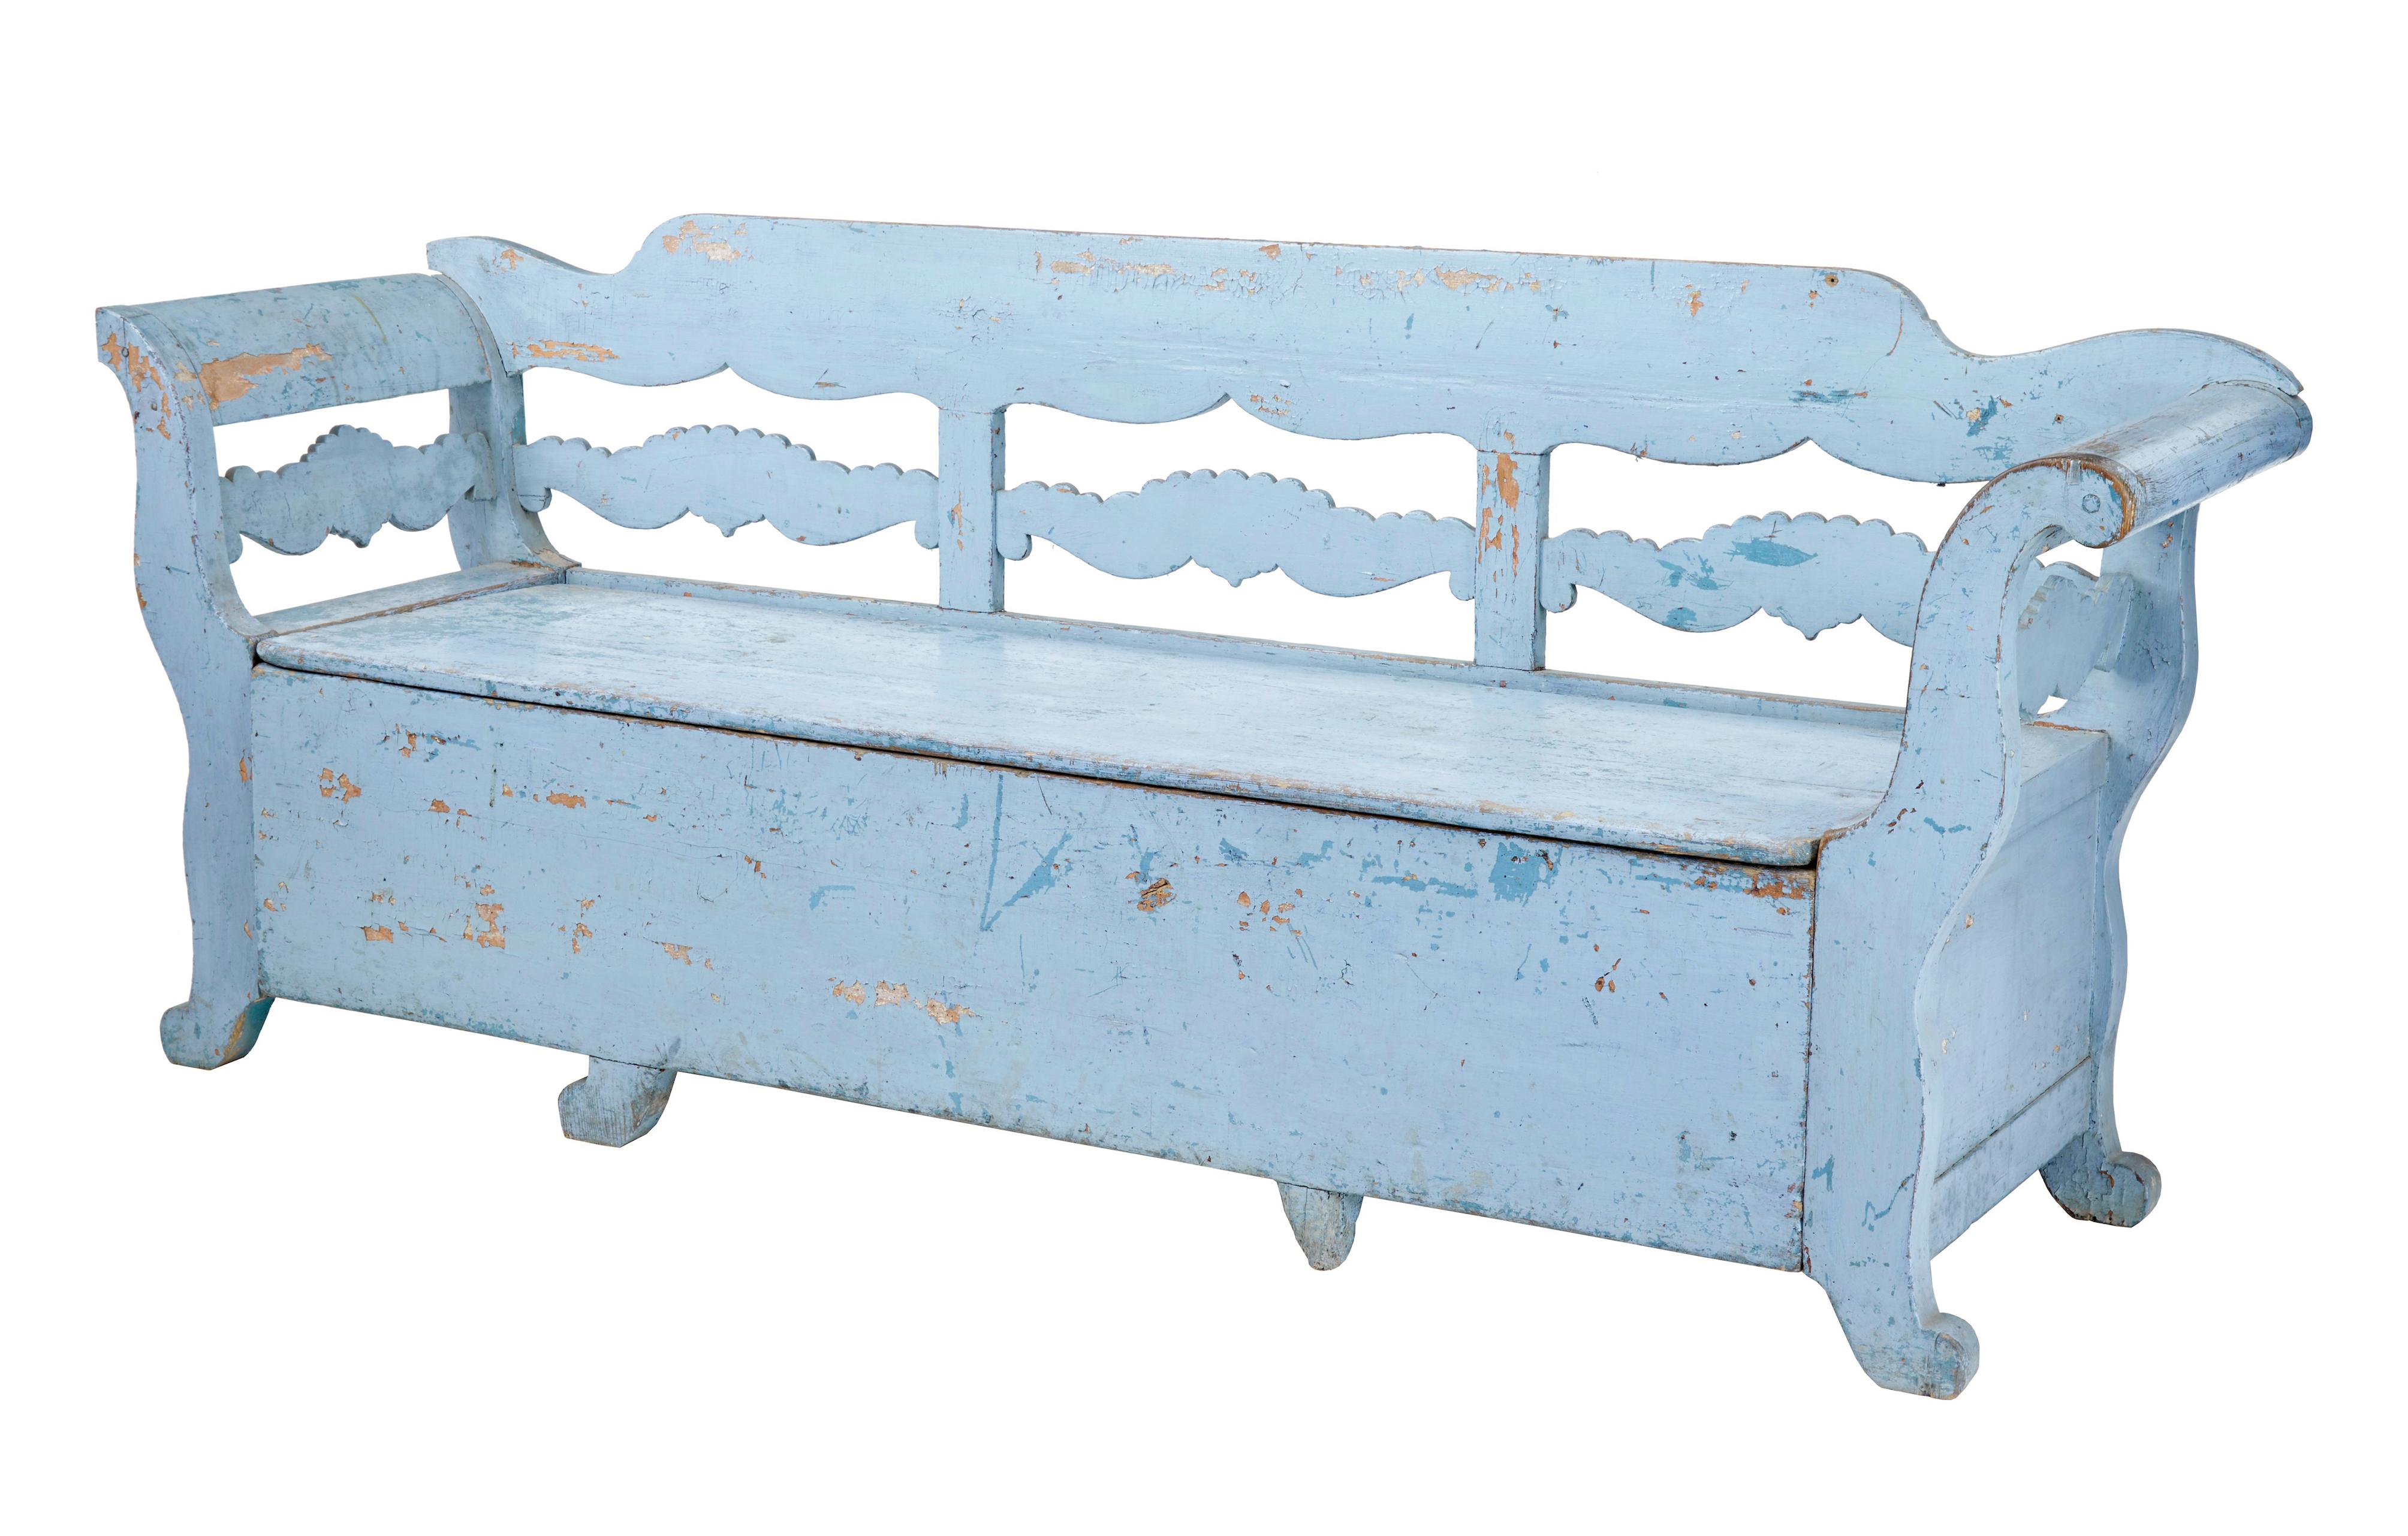 Mid-19th Century large painted Swedish bench daybed

Large rustic Swedish pine bench / daybed circa 1850.

Very heavy item. Ideal for a summer house or garden room. Lift up seat which allows the base to be pulled out to form a bed. N.B it no